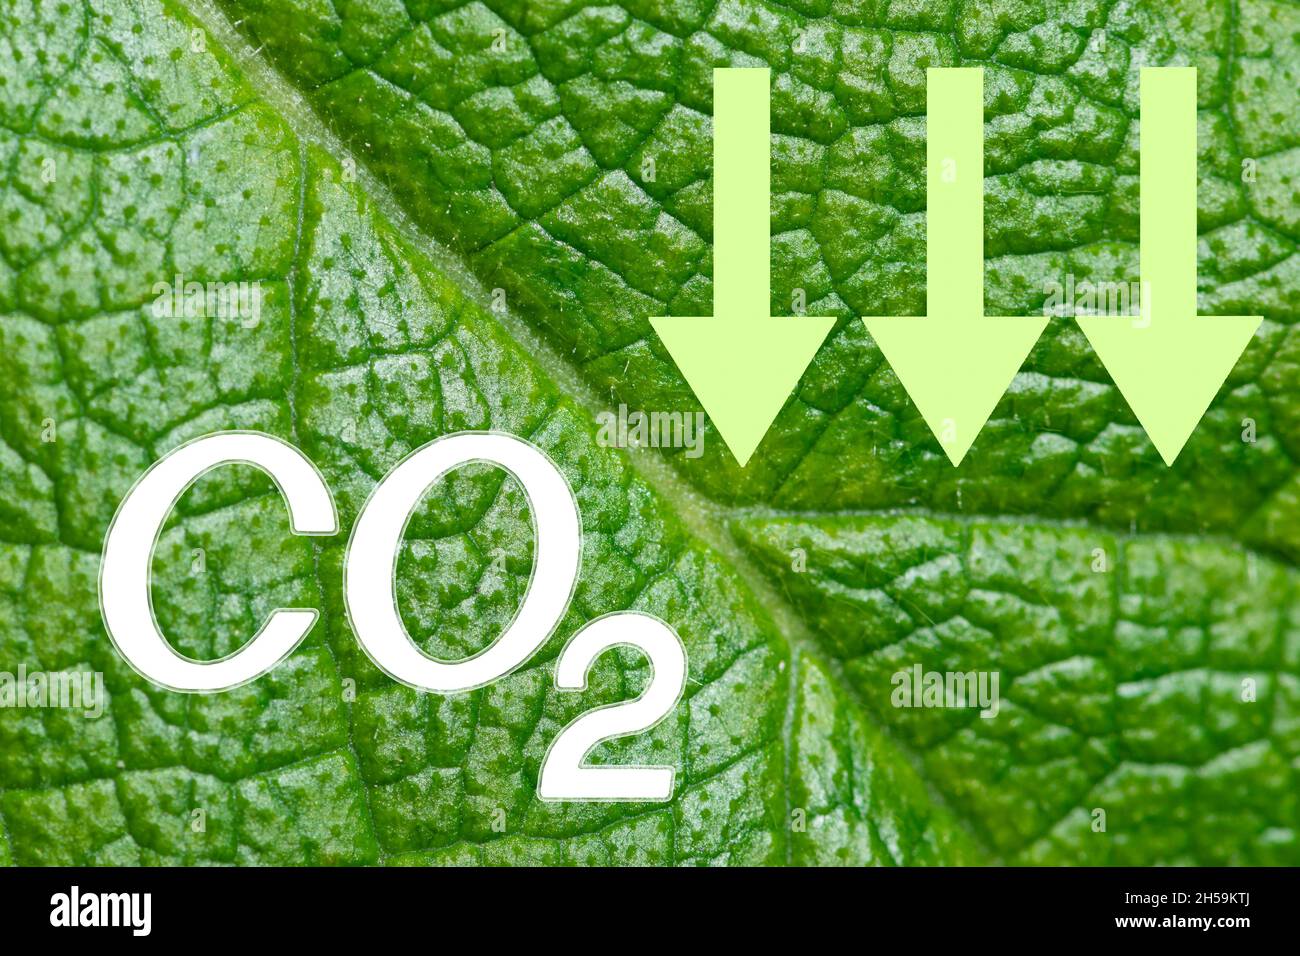 Co2 carbon dioxide sign and arrows down on green leaf background. Co2 reduction concept. Save the planet concept Stock Photo